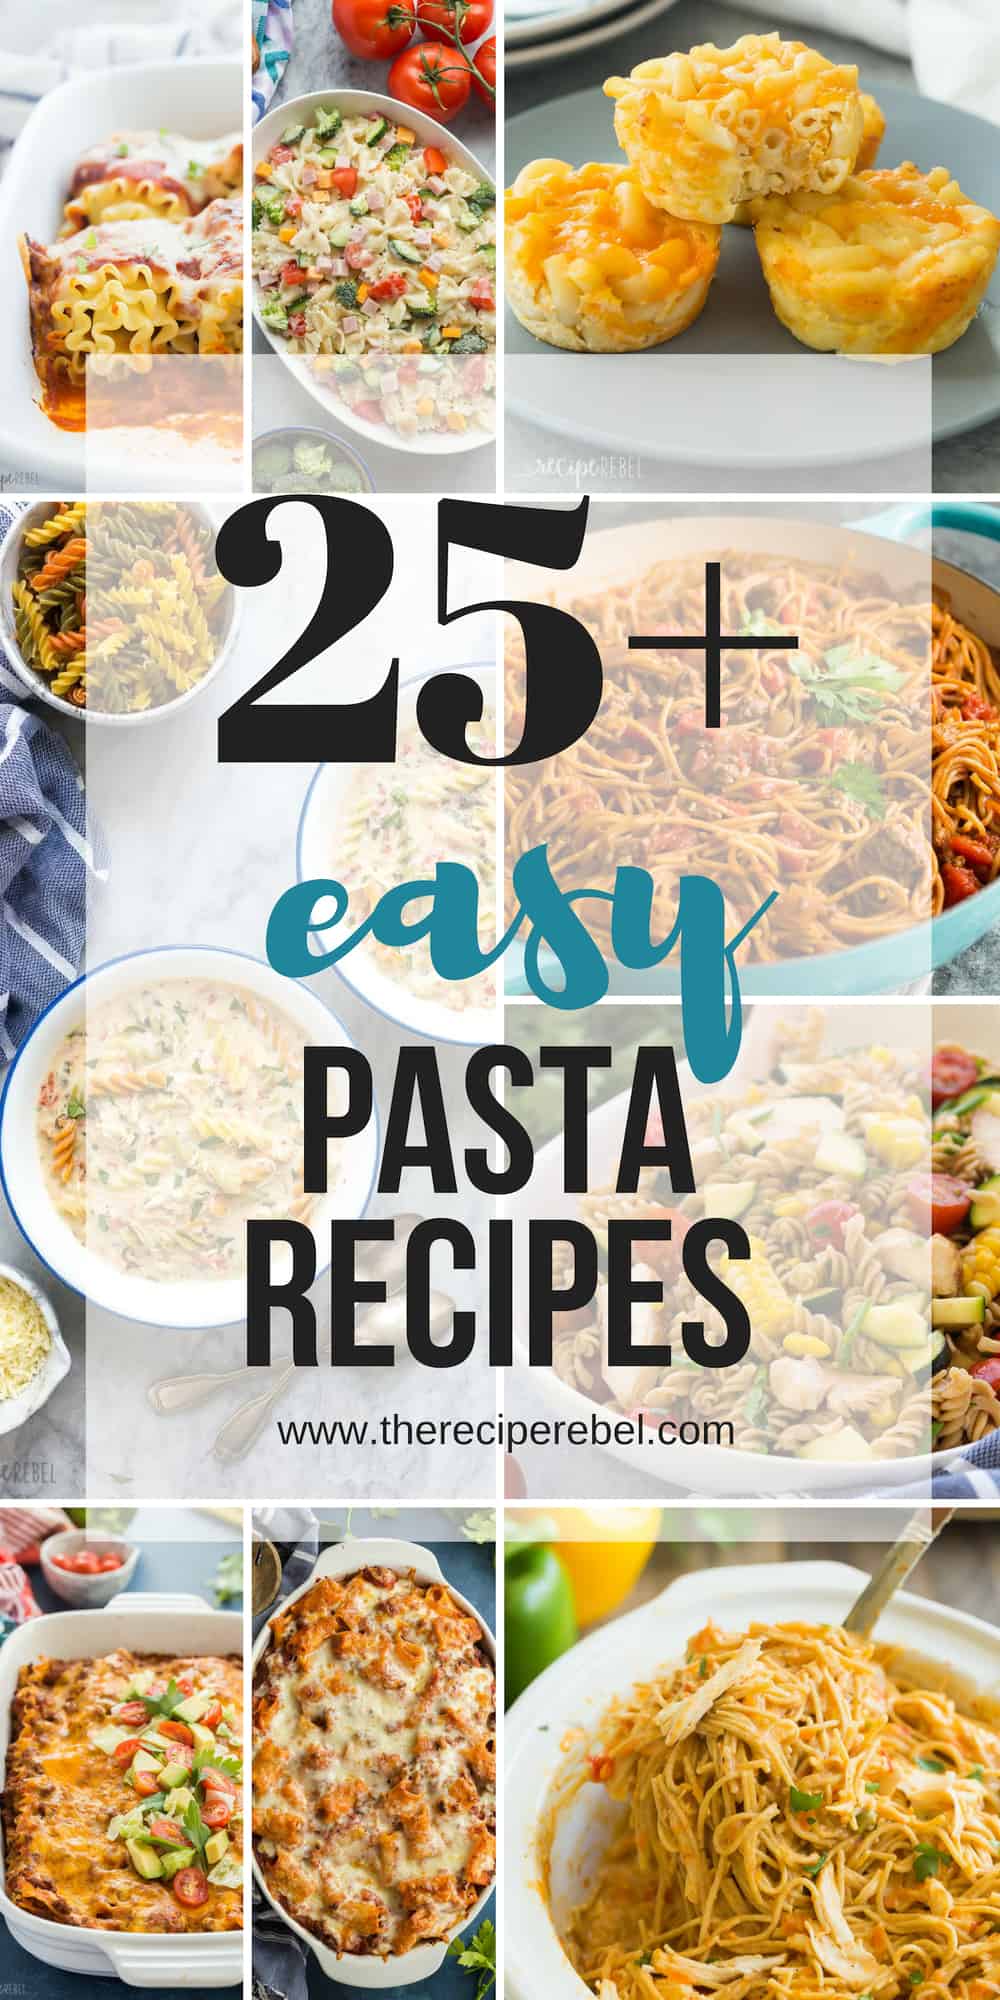 easy pasta recipes collage with multiple images and title in black and blue text